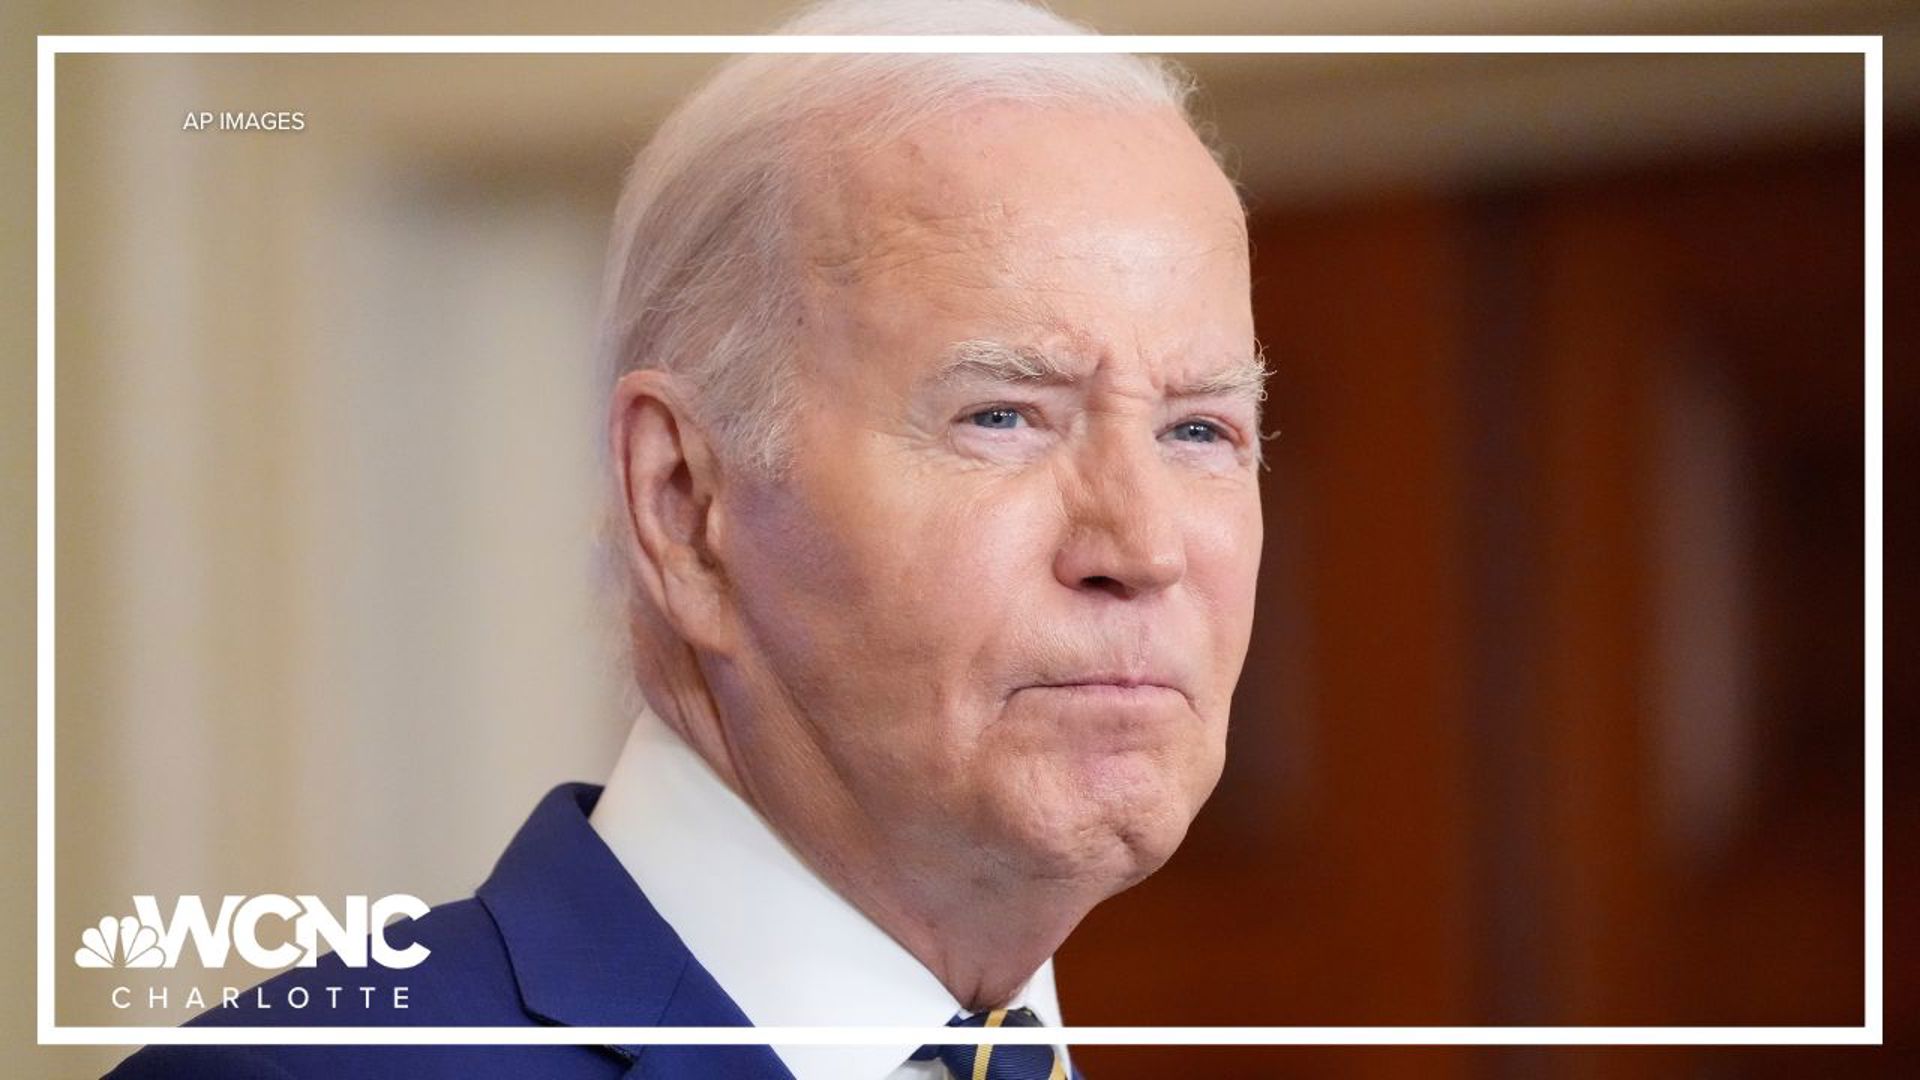 President Joe Biden's halting debate performance has led some in his own party to begin questioning whether he should be replaced on the ballot before November.